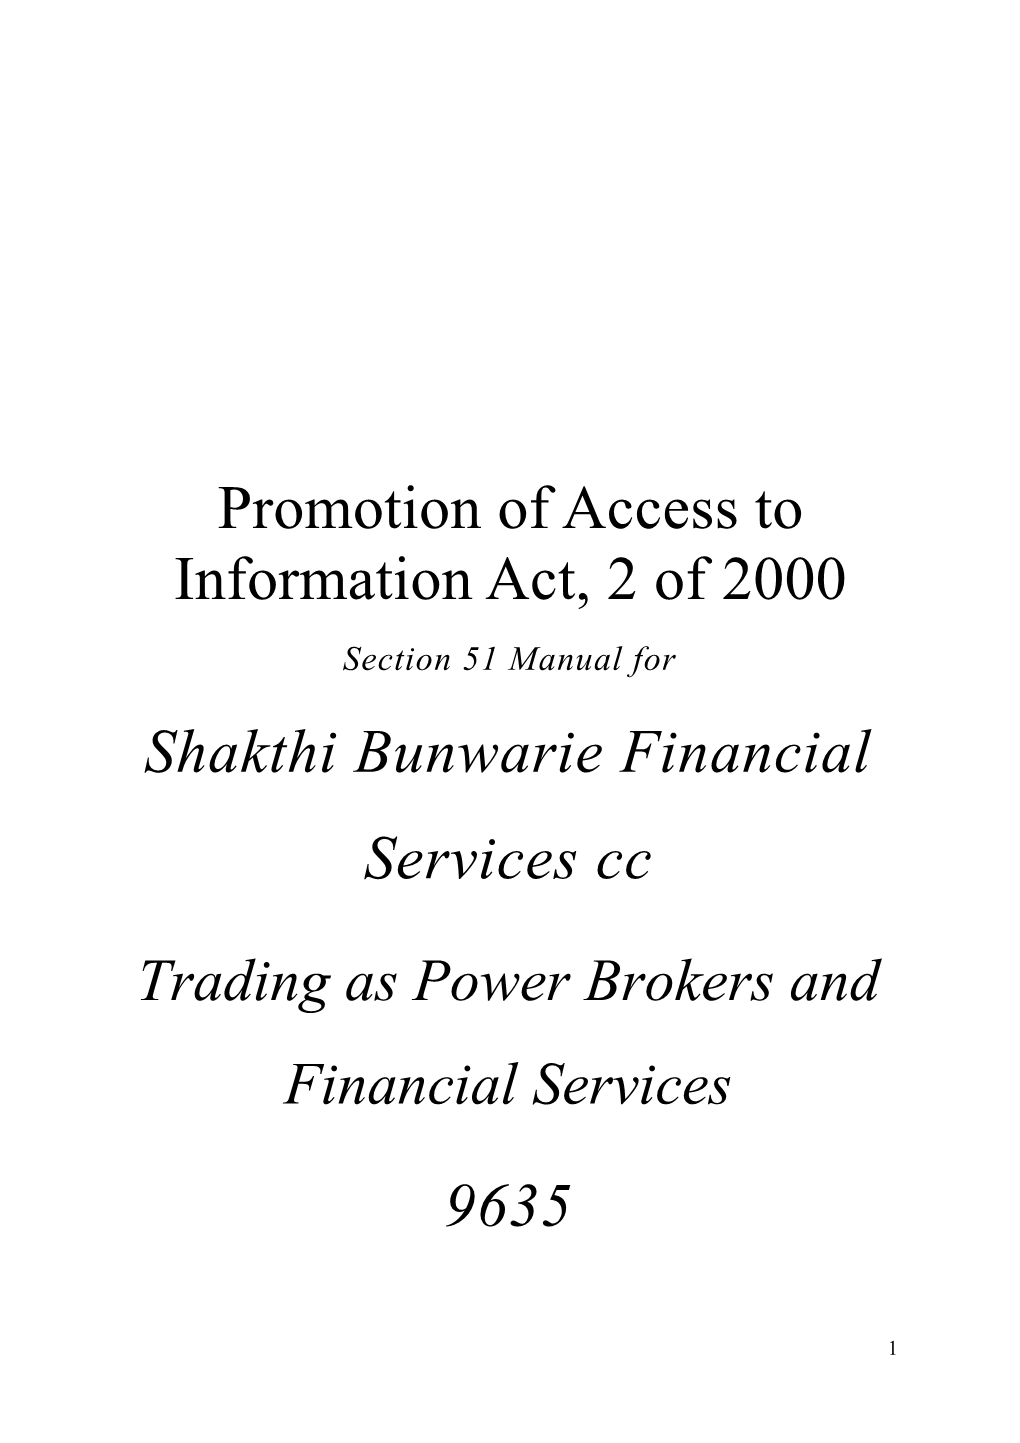 Promotion of Access to Information Act, 2 of 2000